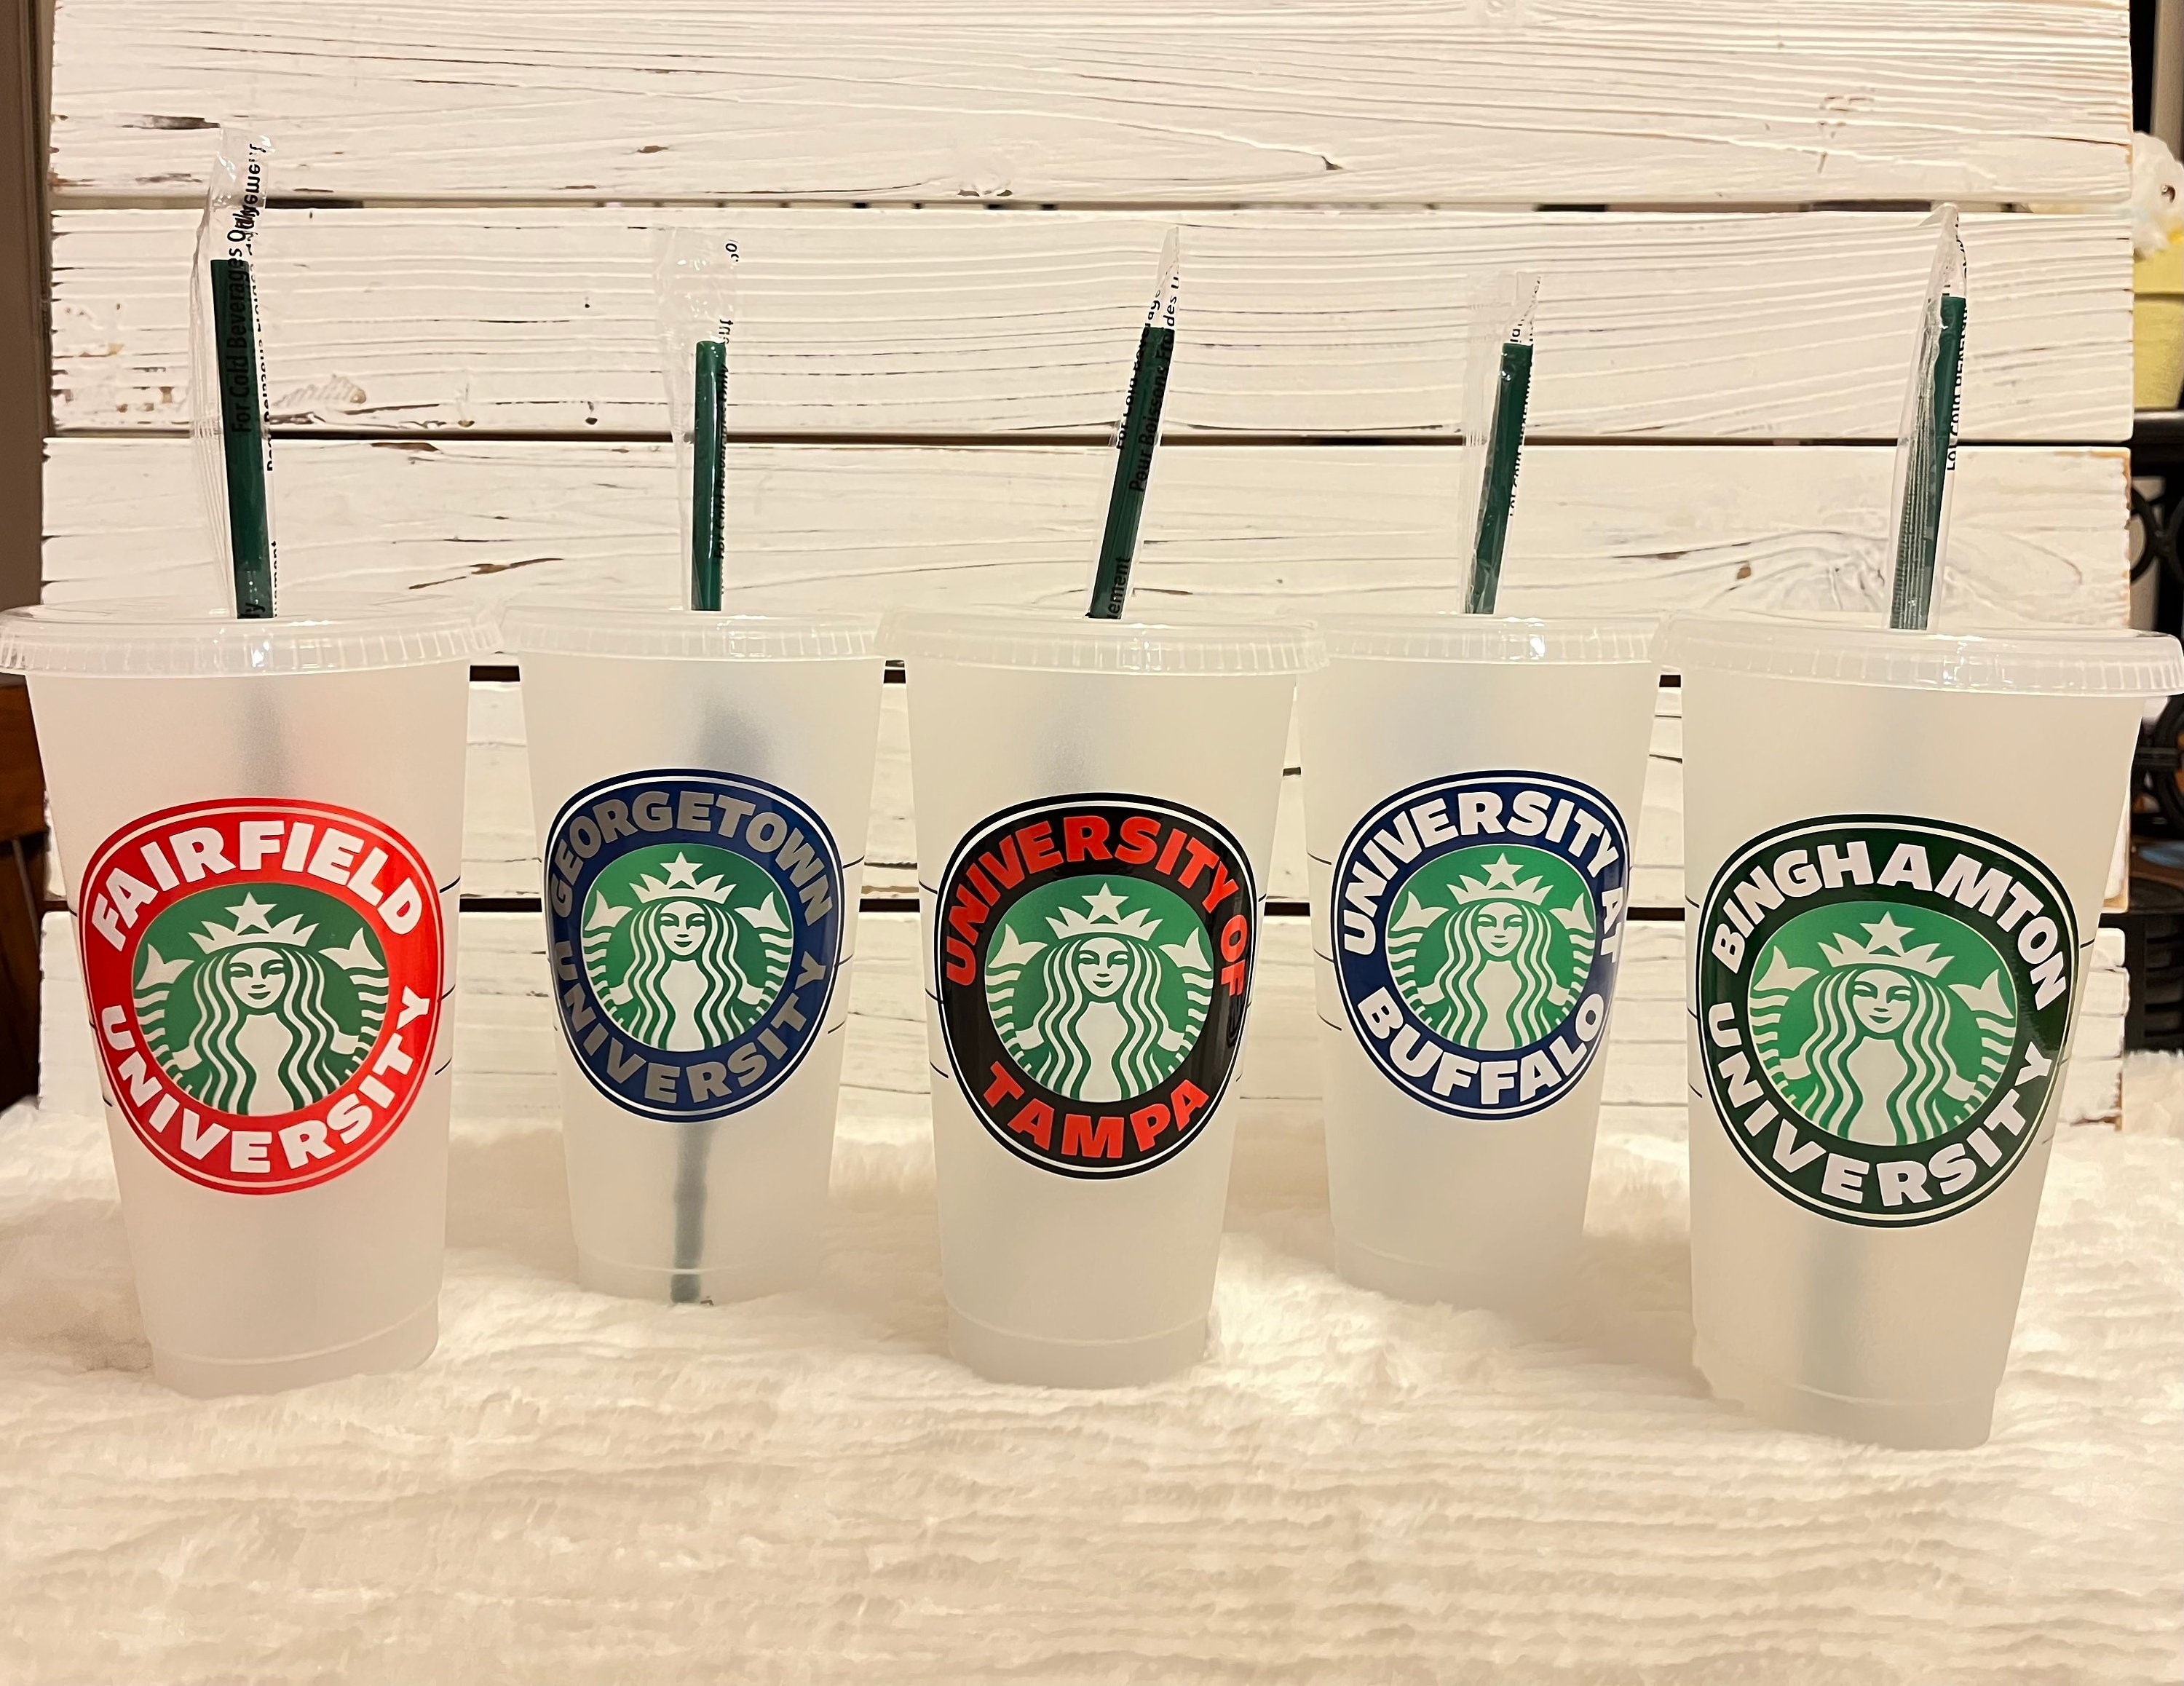 Personalized College Starbucks Cold Cup! – Jeannine's Gifts RVC